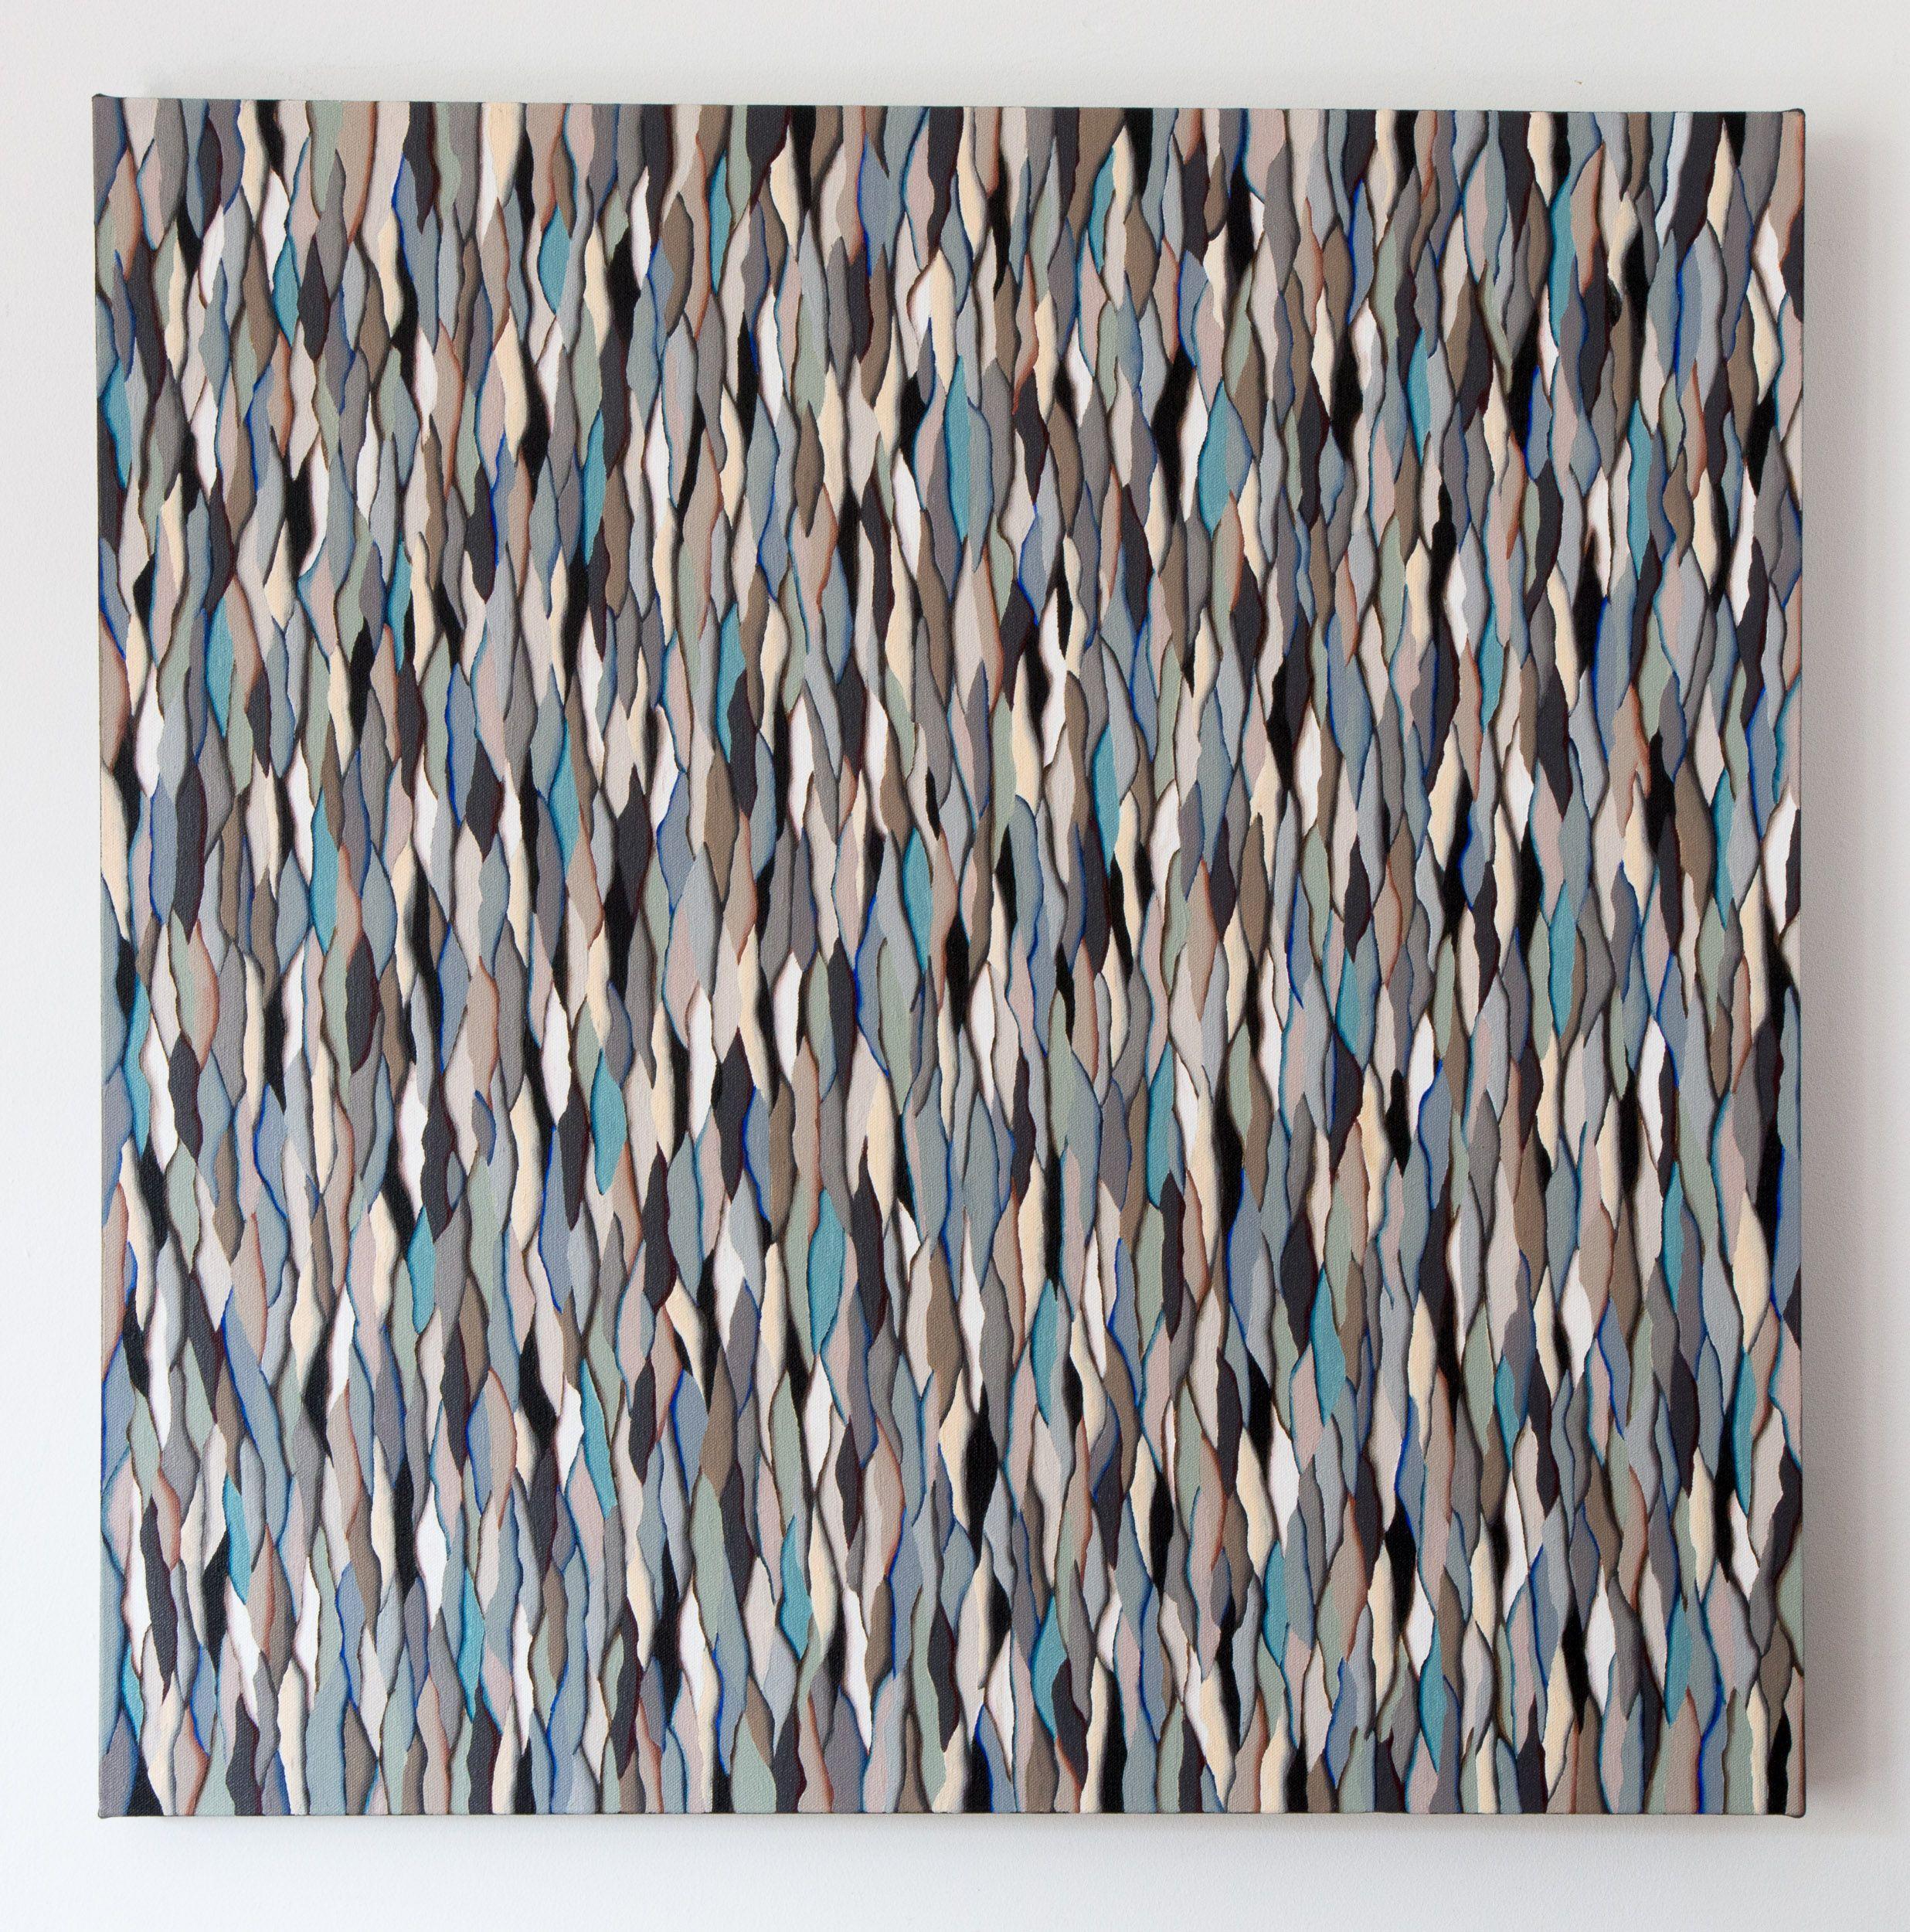 Shifting harmonies, Painting, Acrylic on Canvas - Gray Abstract Painting by Stefan Fierros